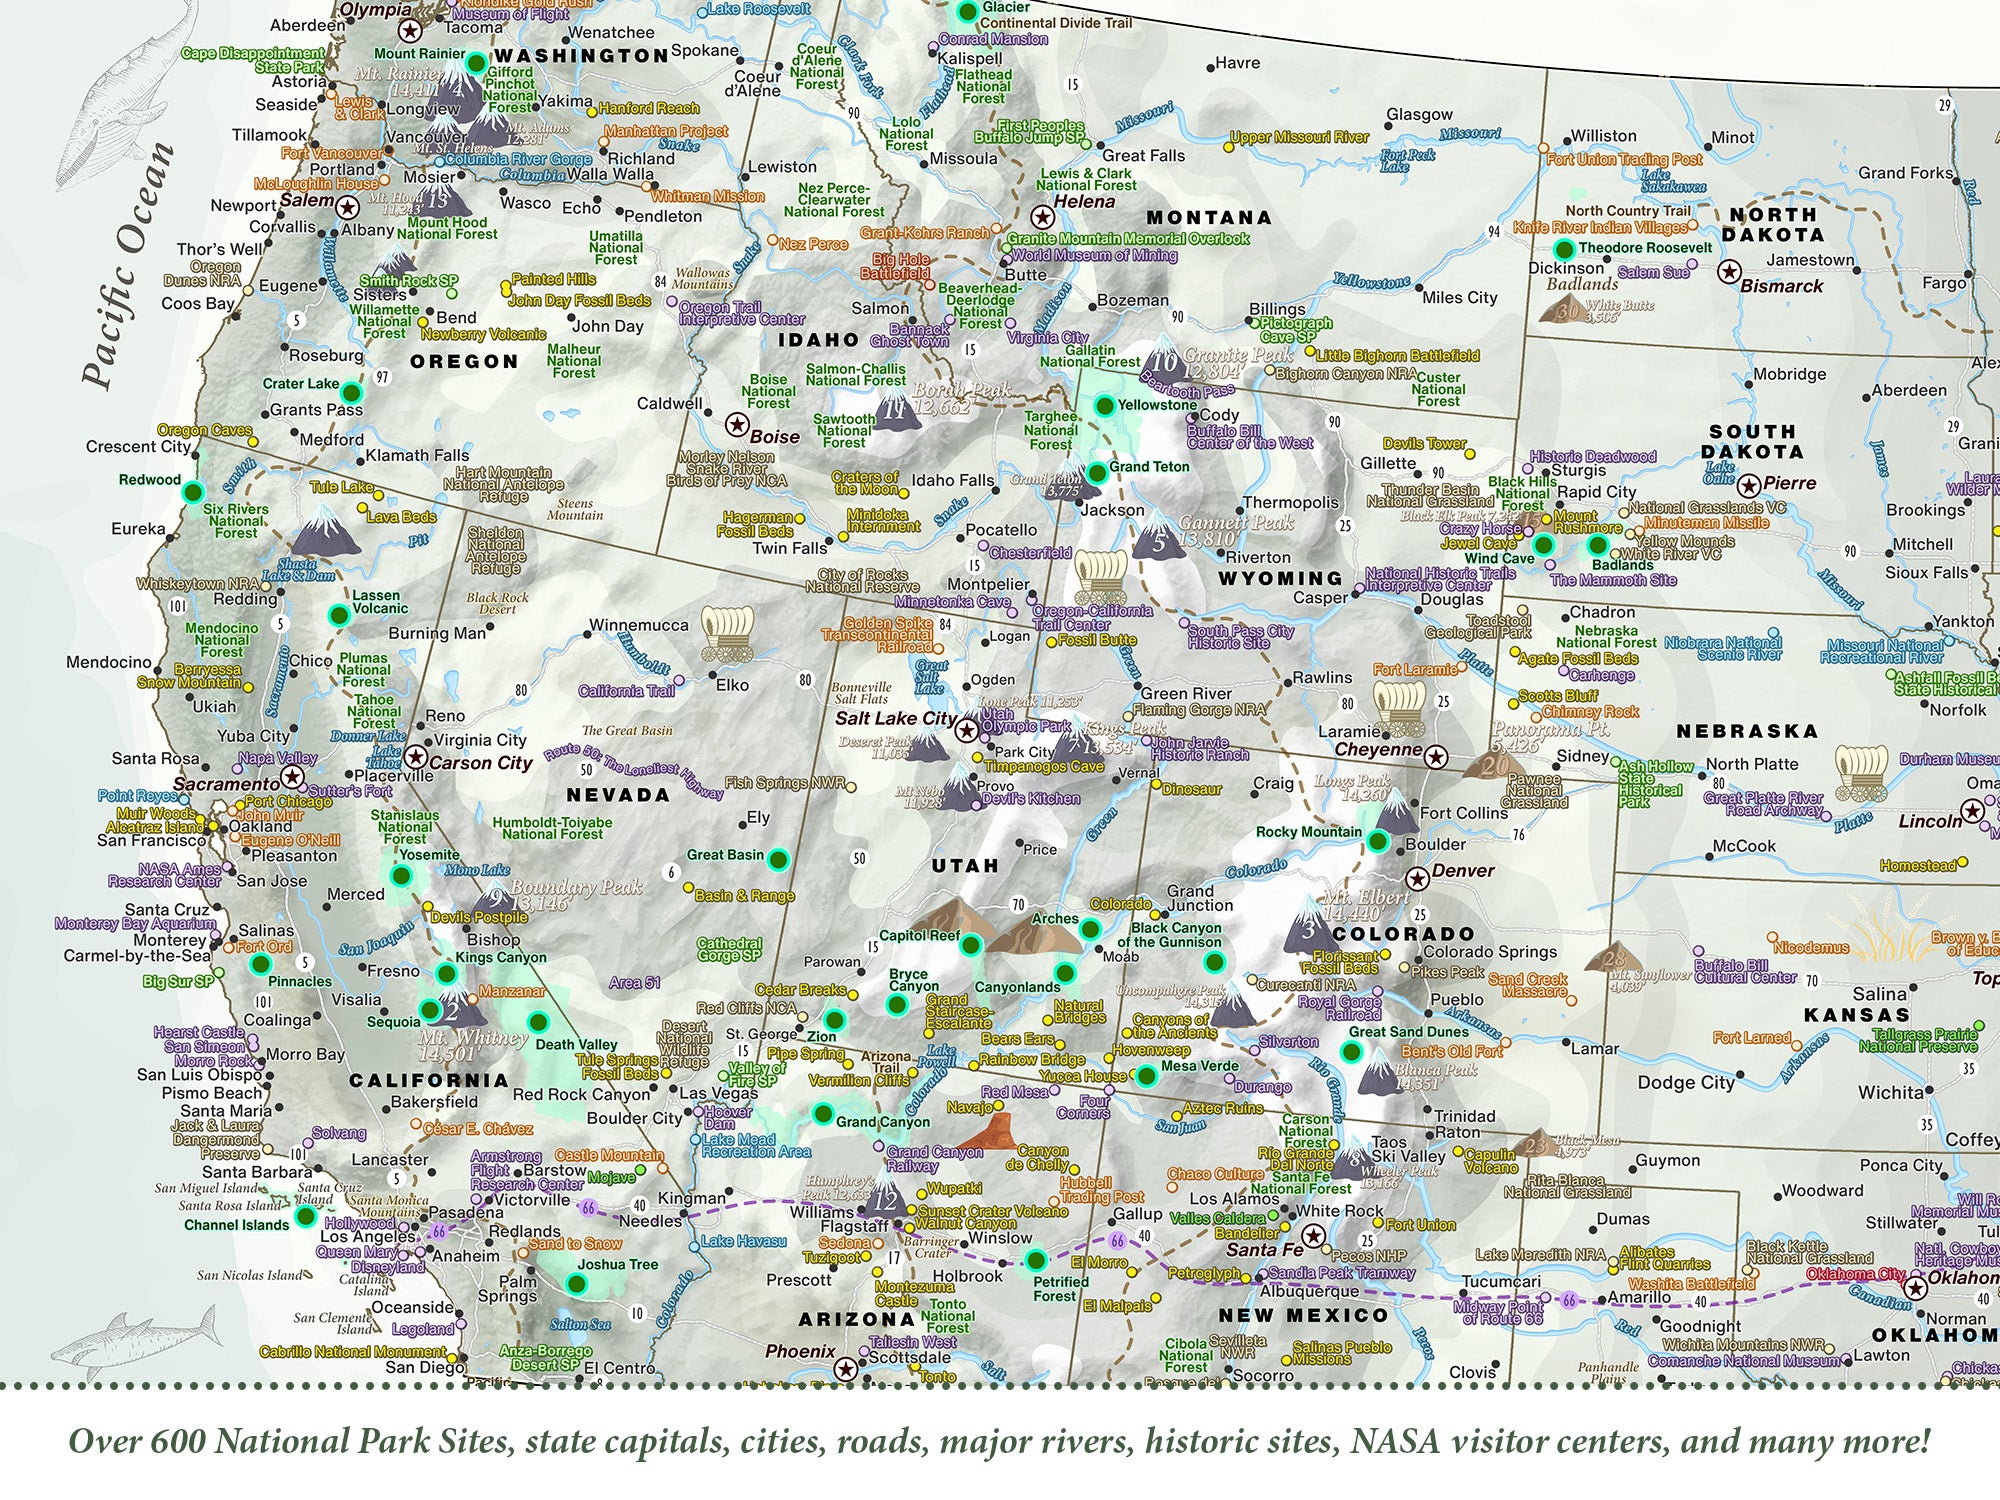 map includes over 600 national parks sites